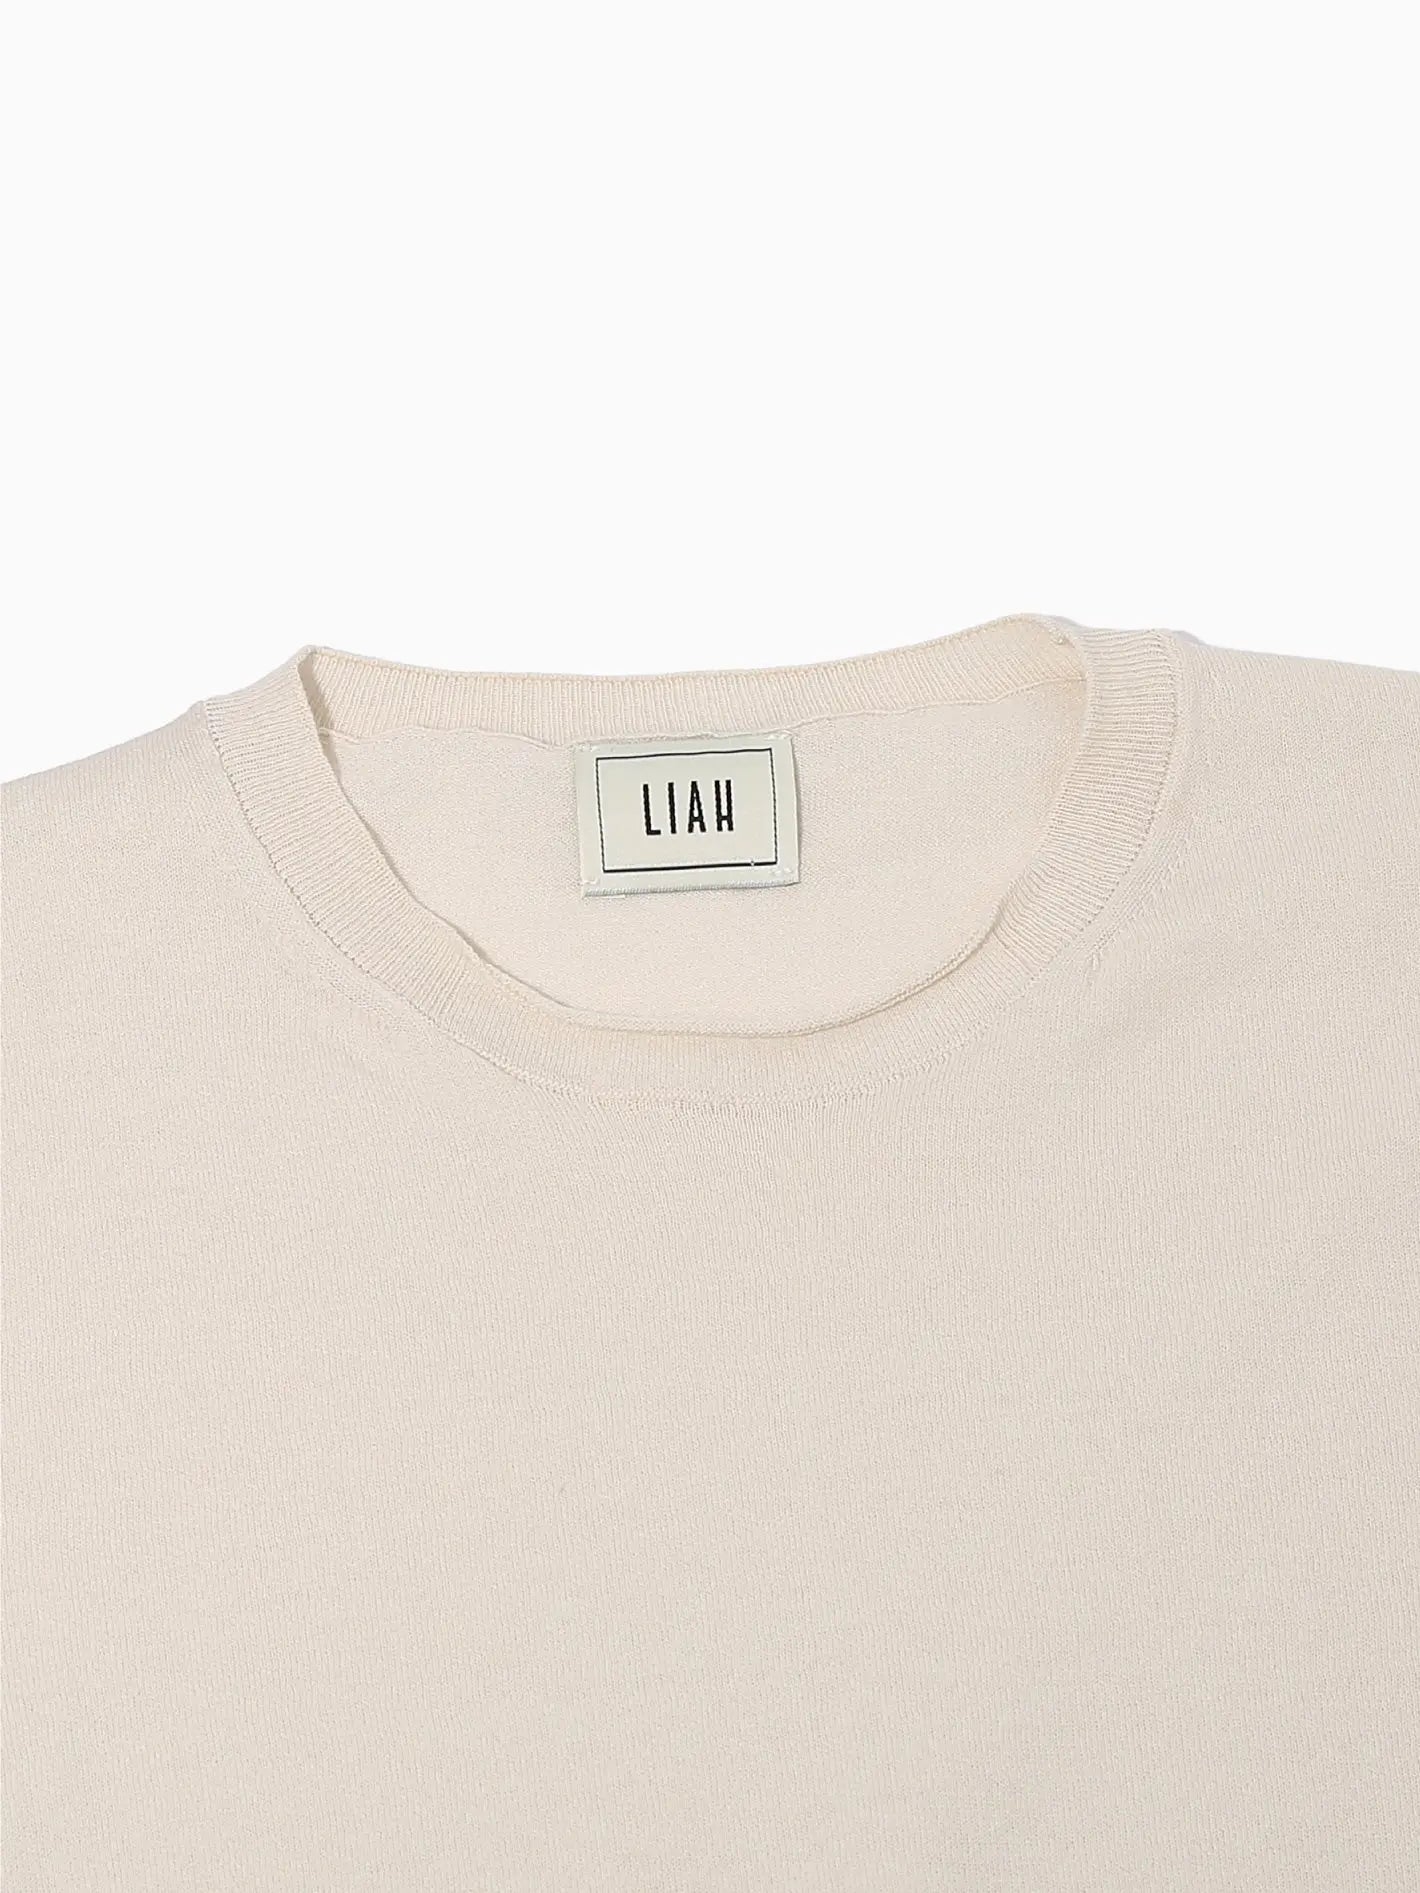 A plain beige Gia T-Shirt Ecru from Liah is seen against a white background. The shirt boasts a simple round neckline and a relaxed fit, with subtle stitching visible along the hems of the sleeves and bottom edge, embodying the effortless style of Barcelona.